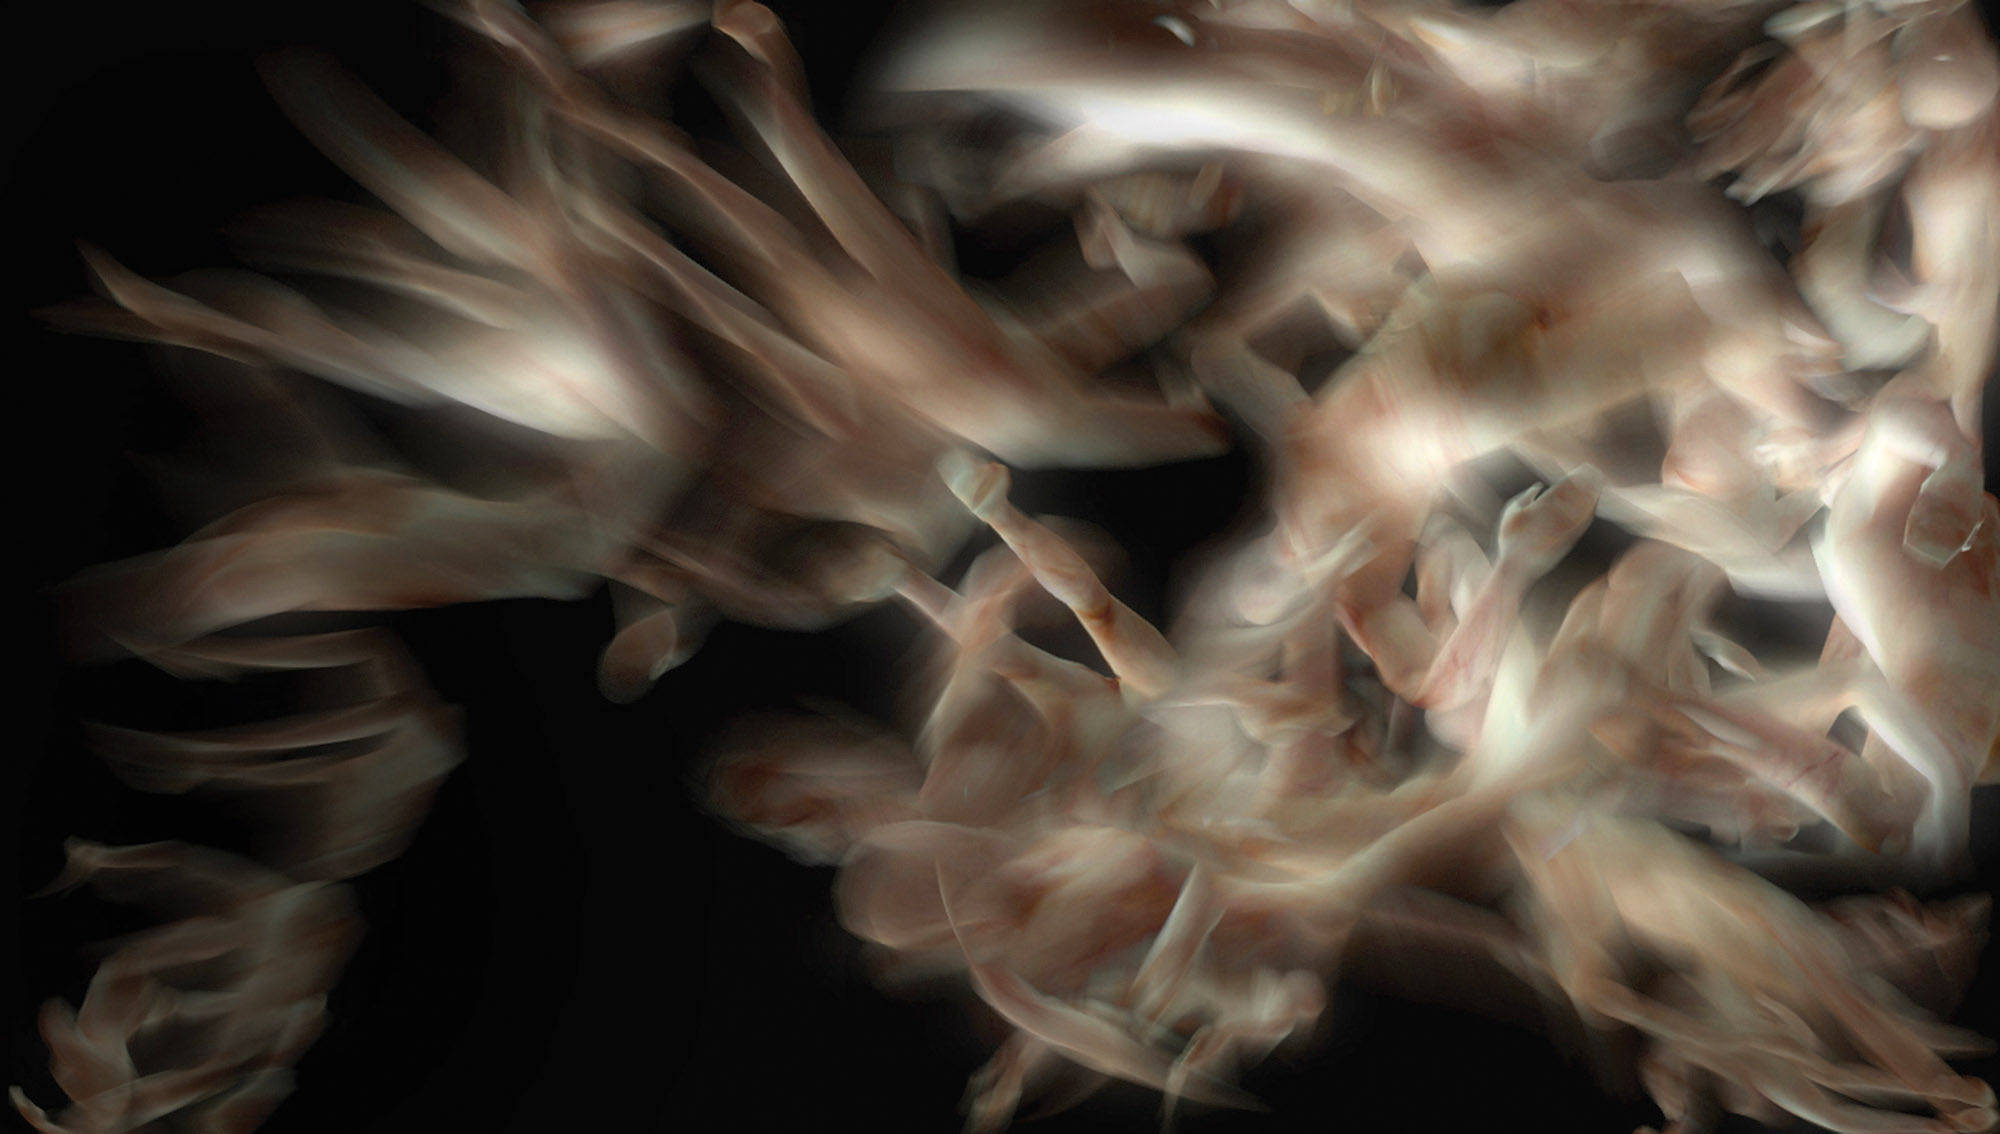 Abstract image of wispy pale human-esque forms floating through black space. 